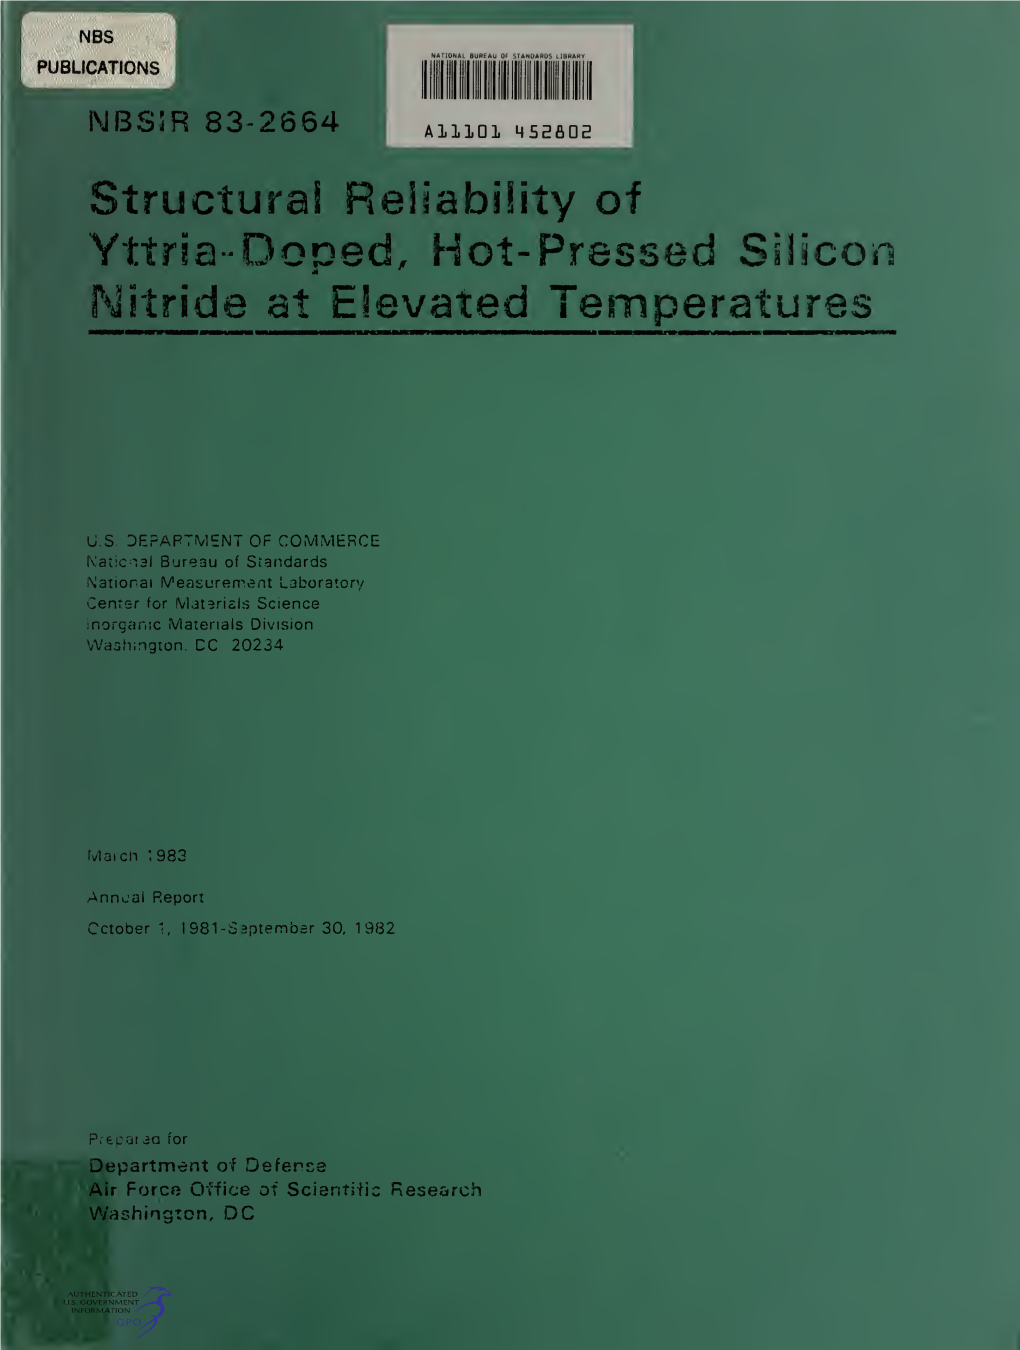 Structural Reliability of Yttria-Doped, Hot-Pressed Silicon Nitride at Elevated